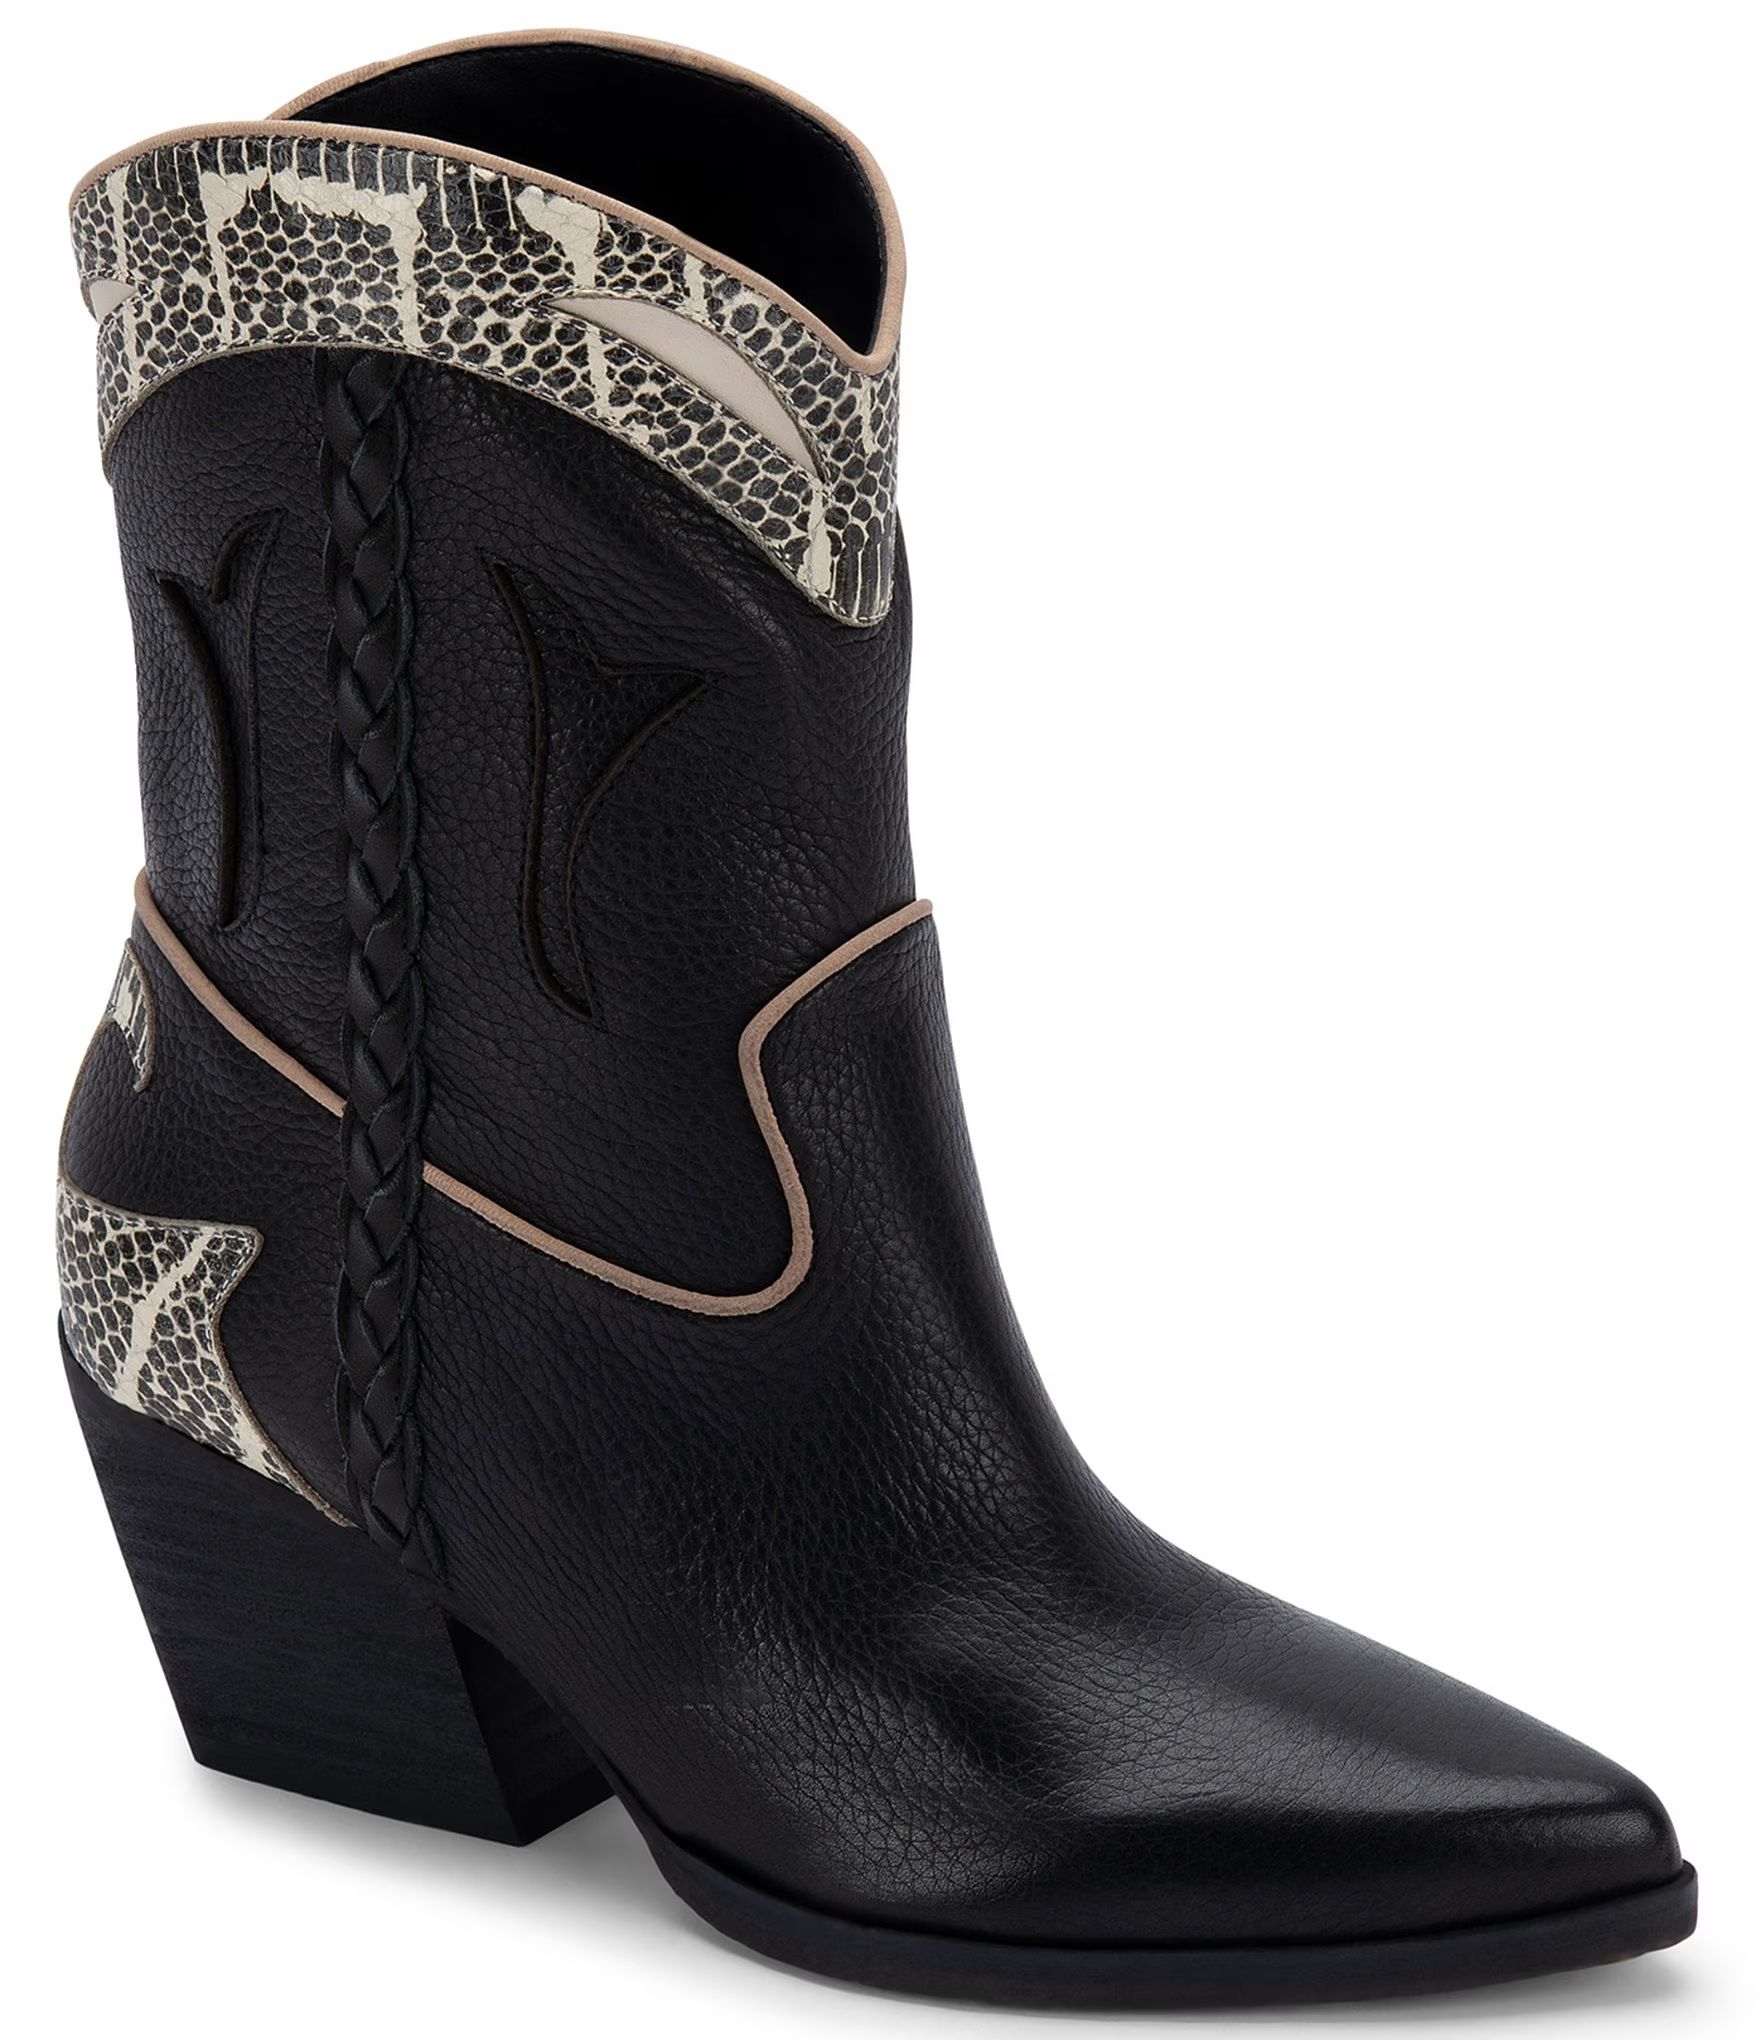 Loral Leather Snake Print Accent Western Mid Boots | Dillards